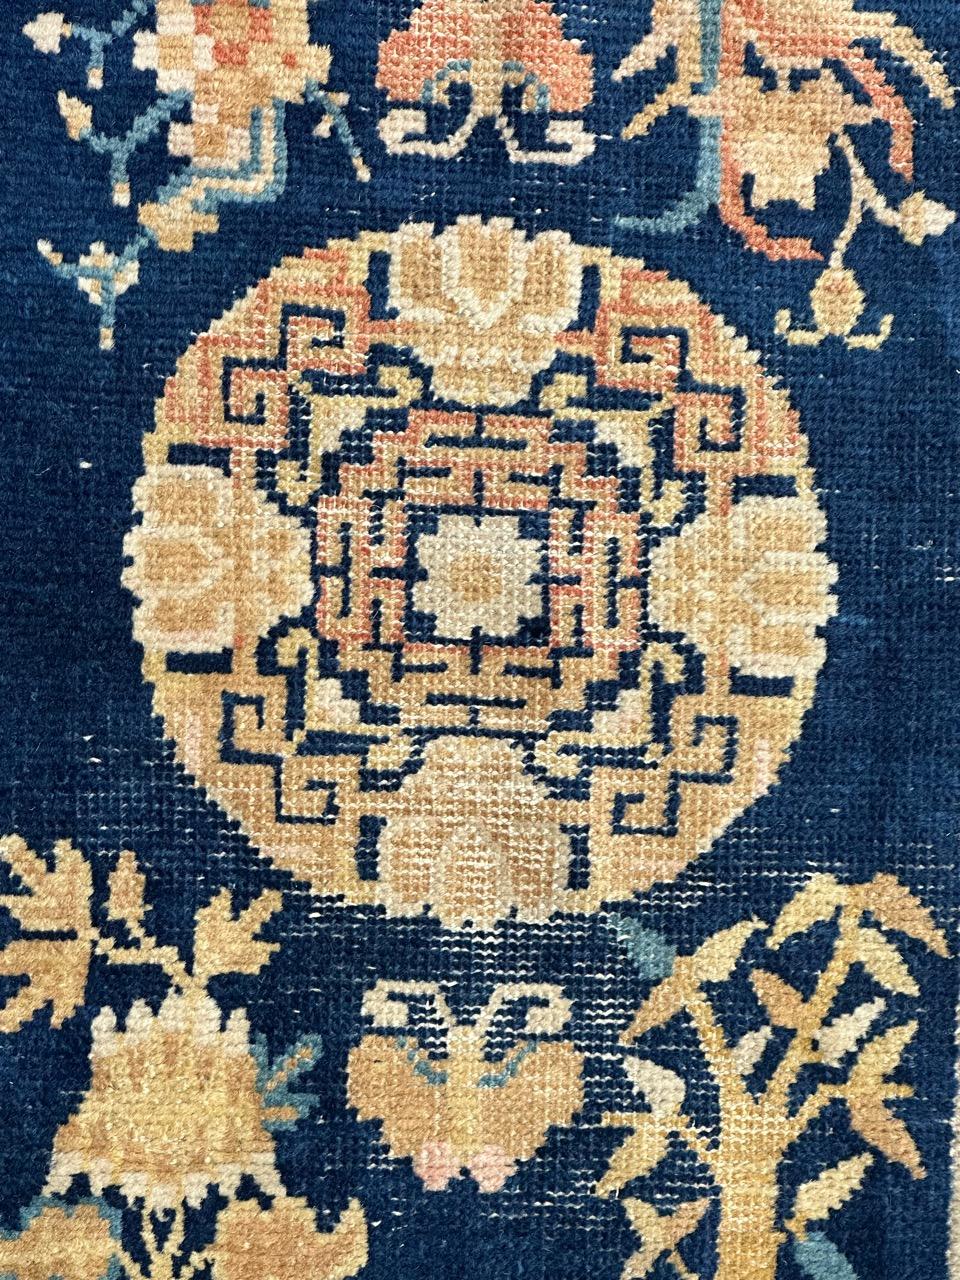 Very nice antique and rare Chinese rug from Ningxia with nice Chinese design and symbols on design, and nice natural colours with a navy blue field and yellow, gold, orange , white and sky blue on design, a beautiful border with stylized designs